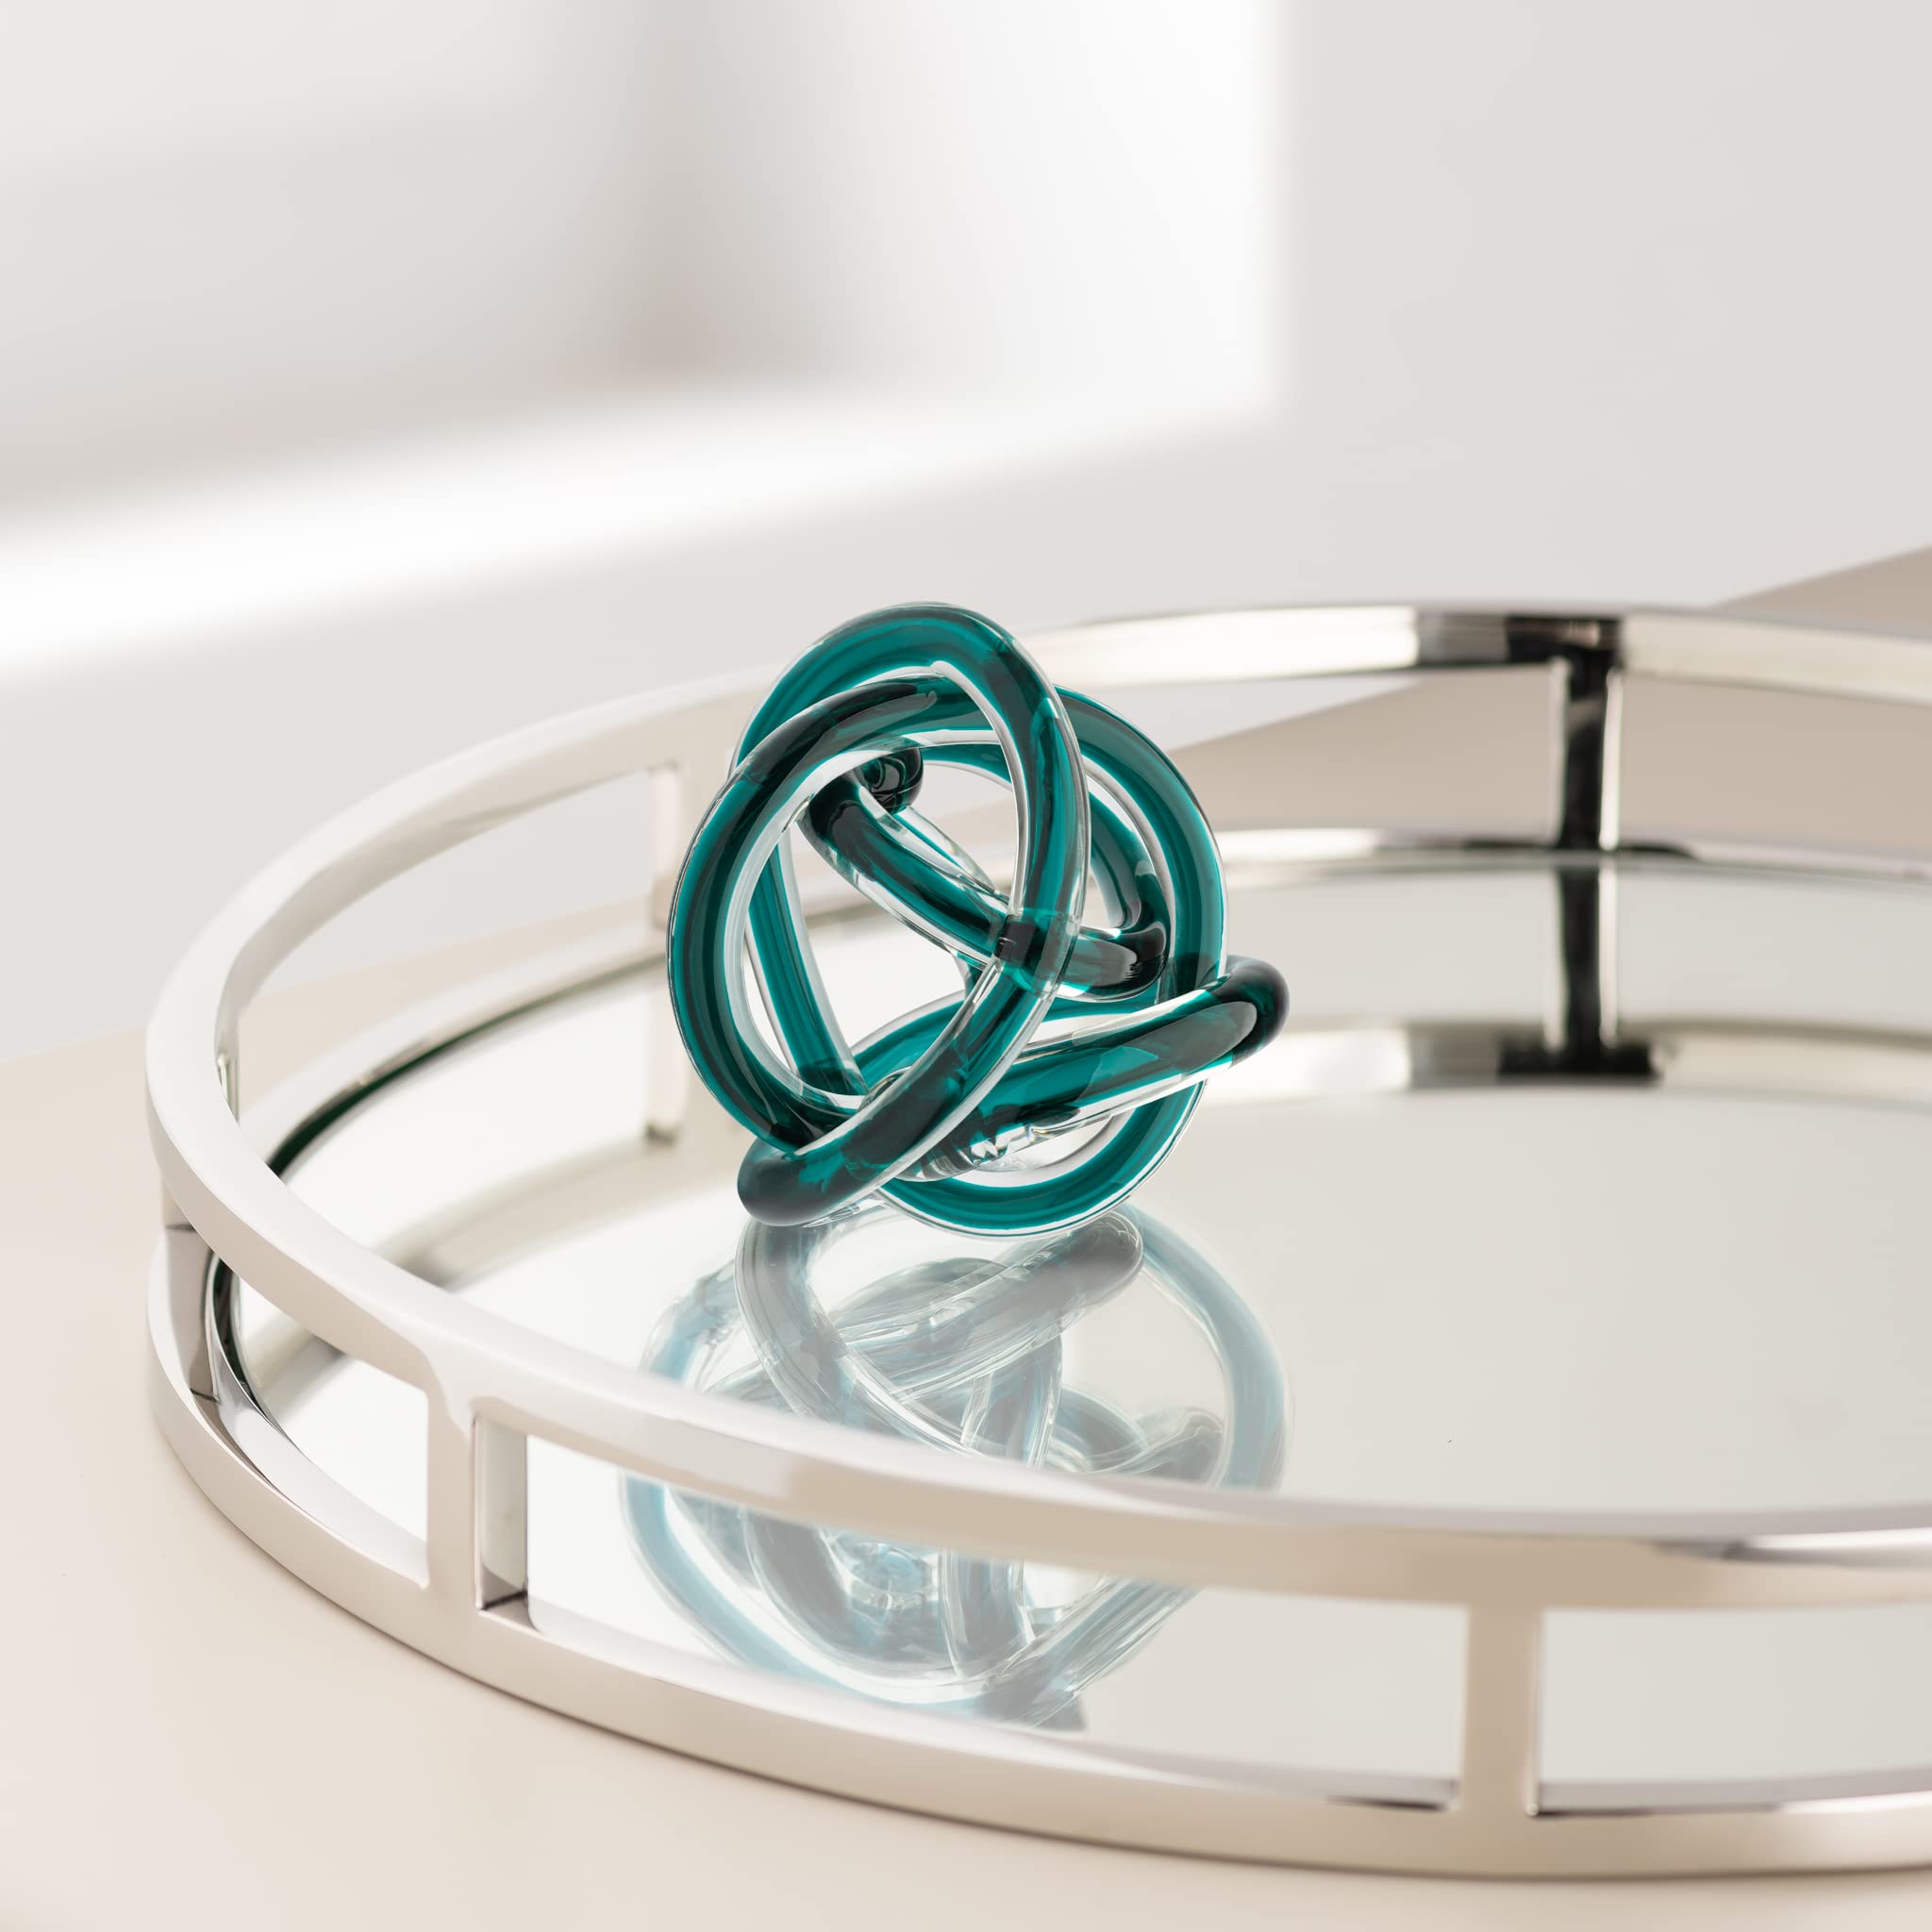 Torre & Tagus Orbit Glass Ball - Abstract Teal Glass Knot for Home Decor on Decorative Books, Modern Room & Office Art Sculpture as Bedroom / Entryway Decor, Shelf Decor, 3